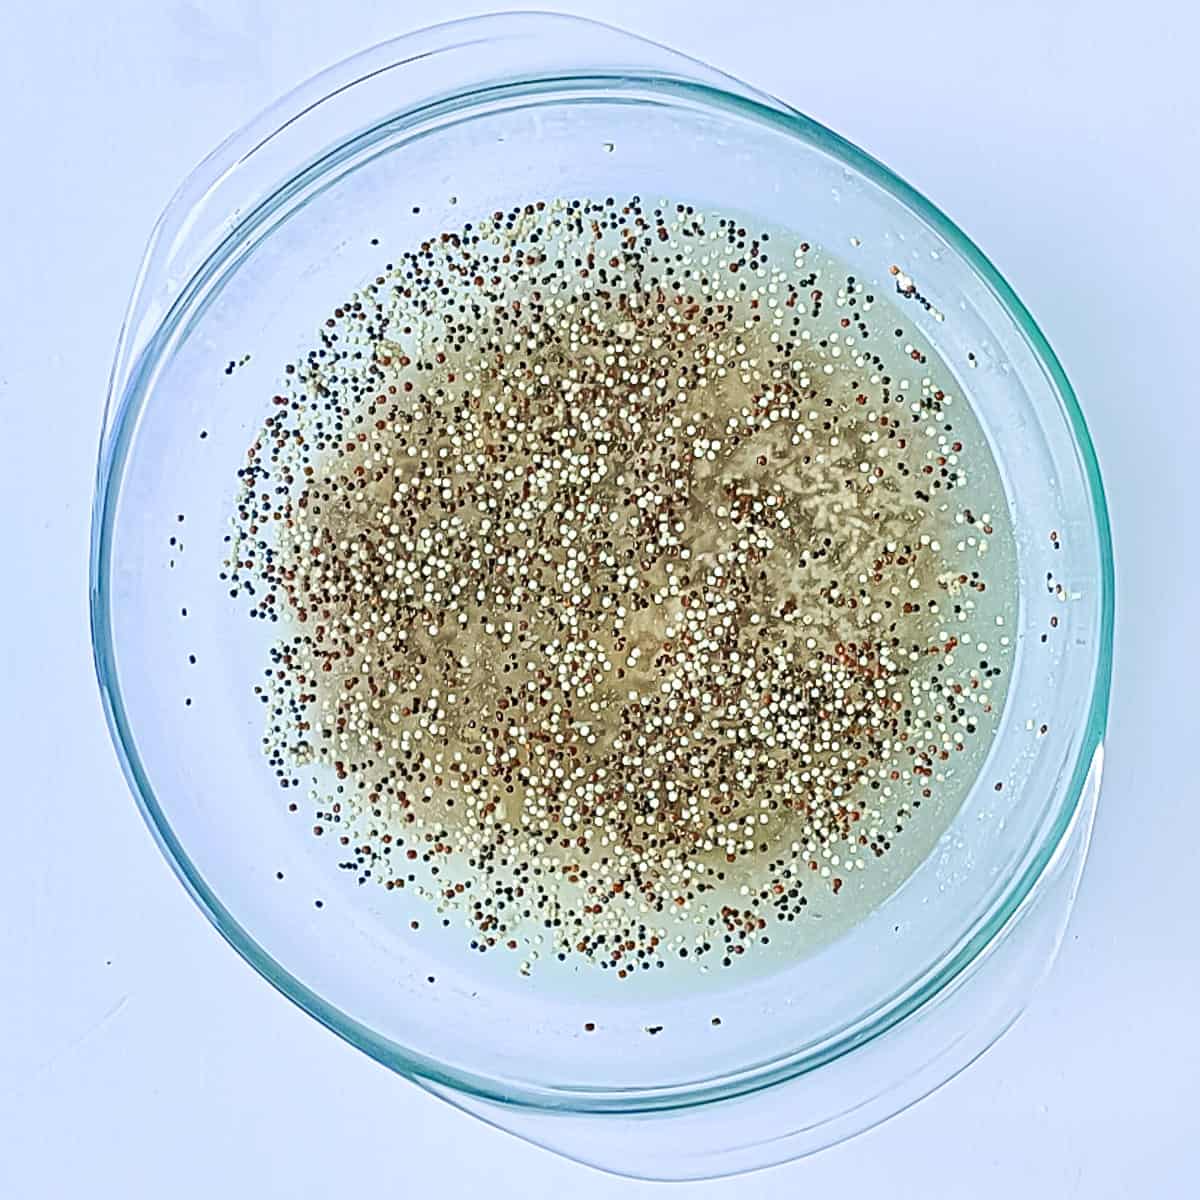 Quinoa seeds mixed with stock in a glass bowl.